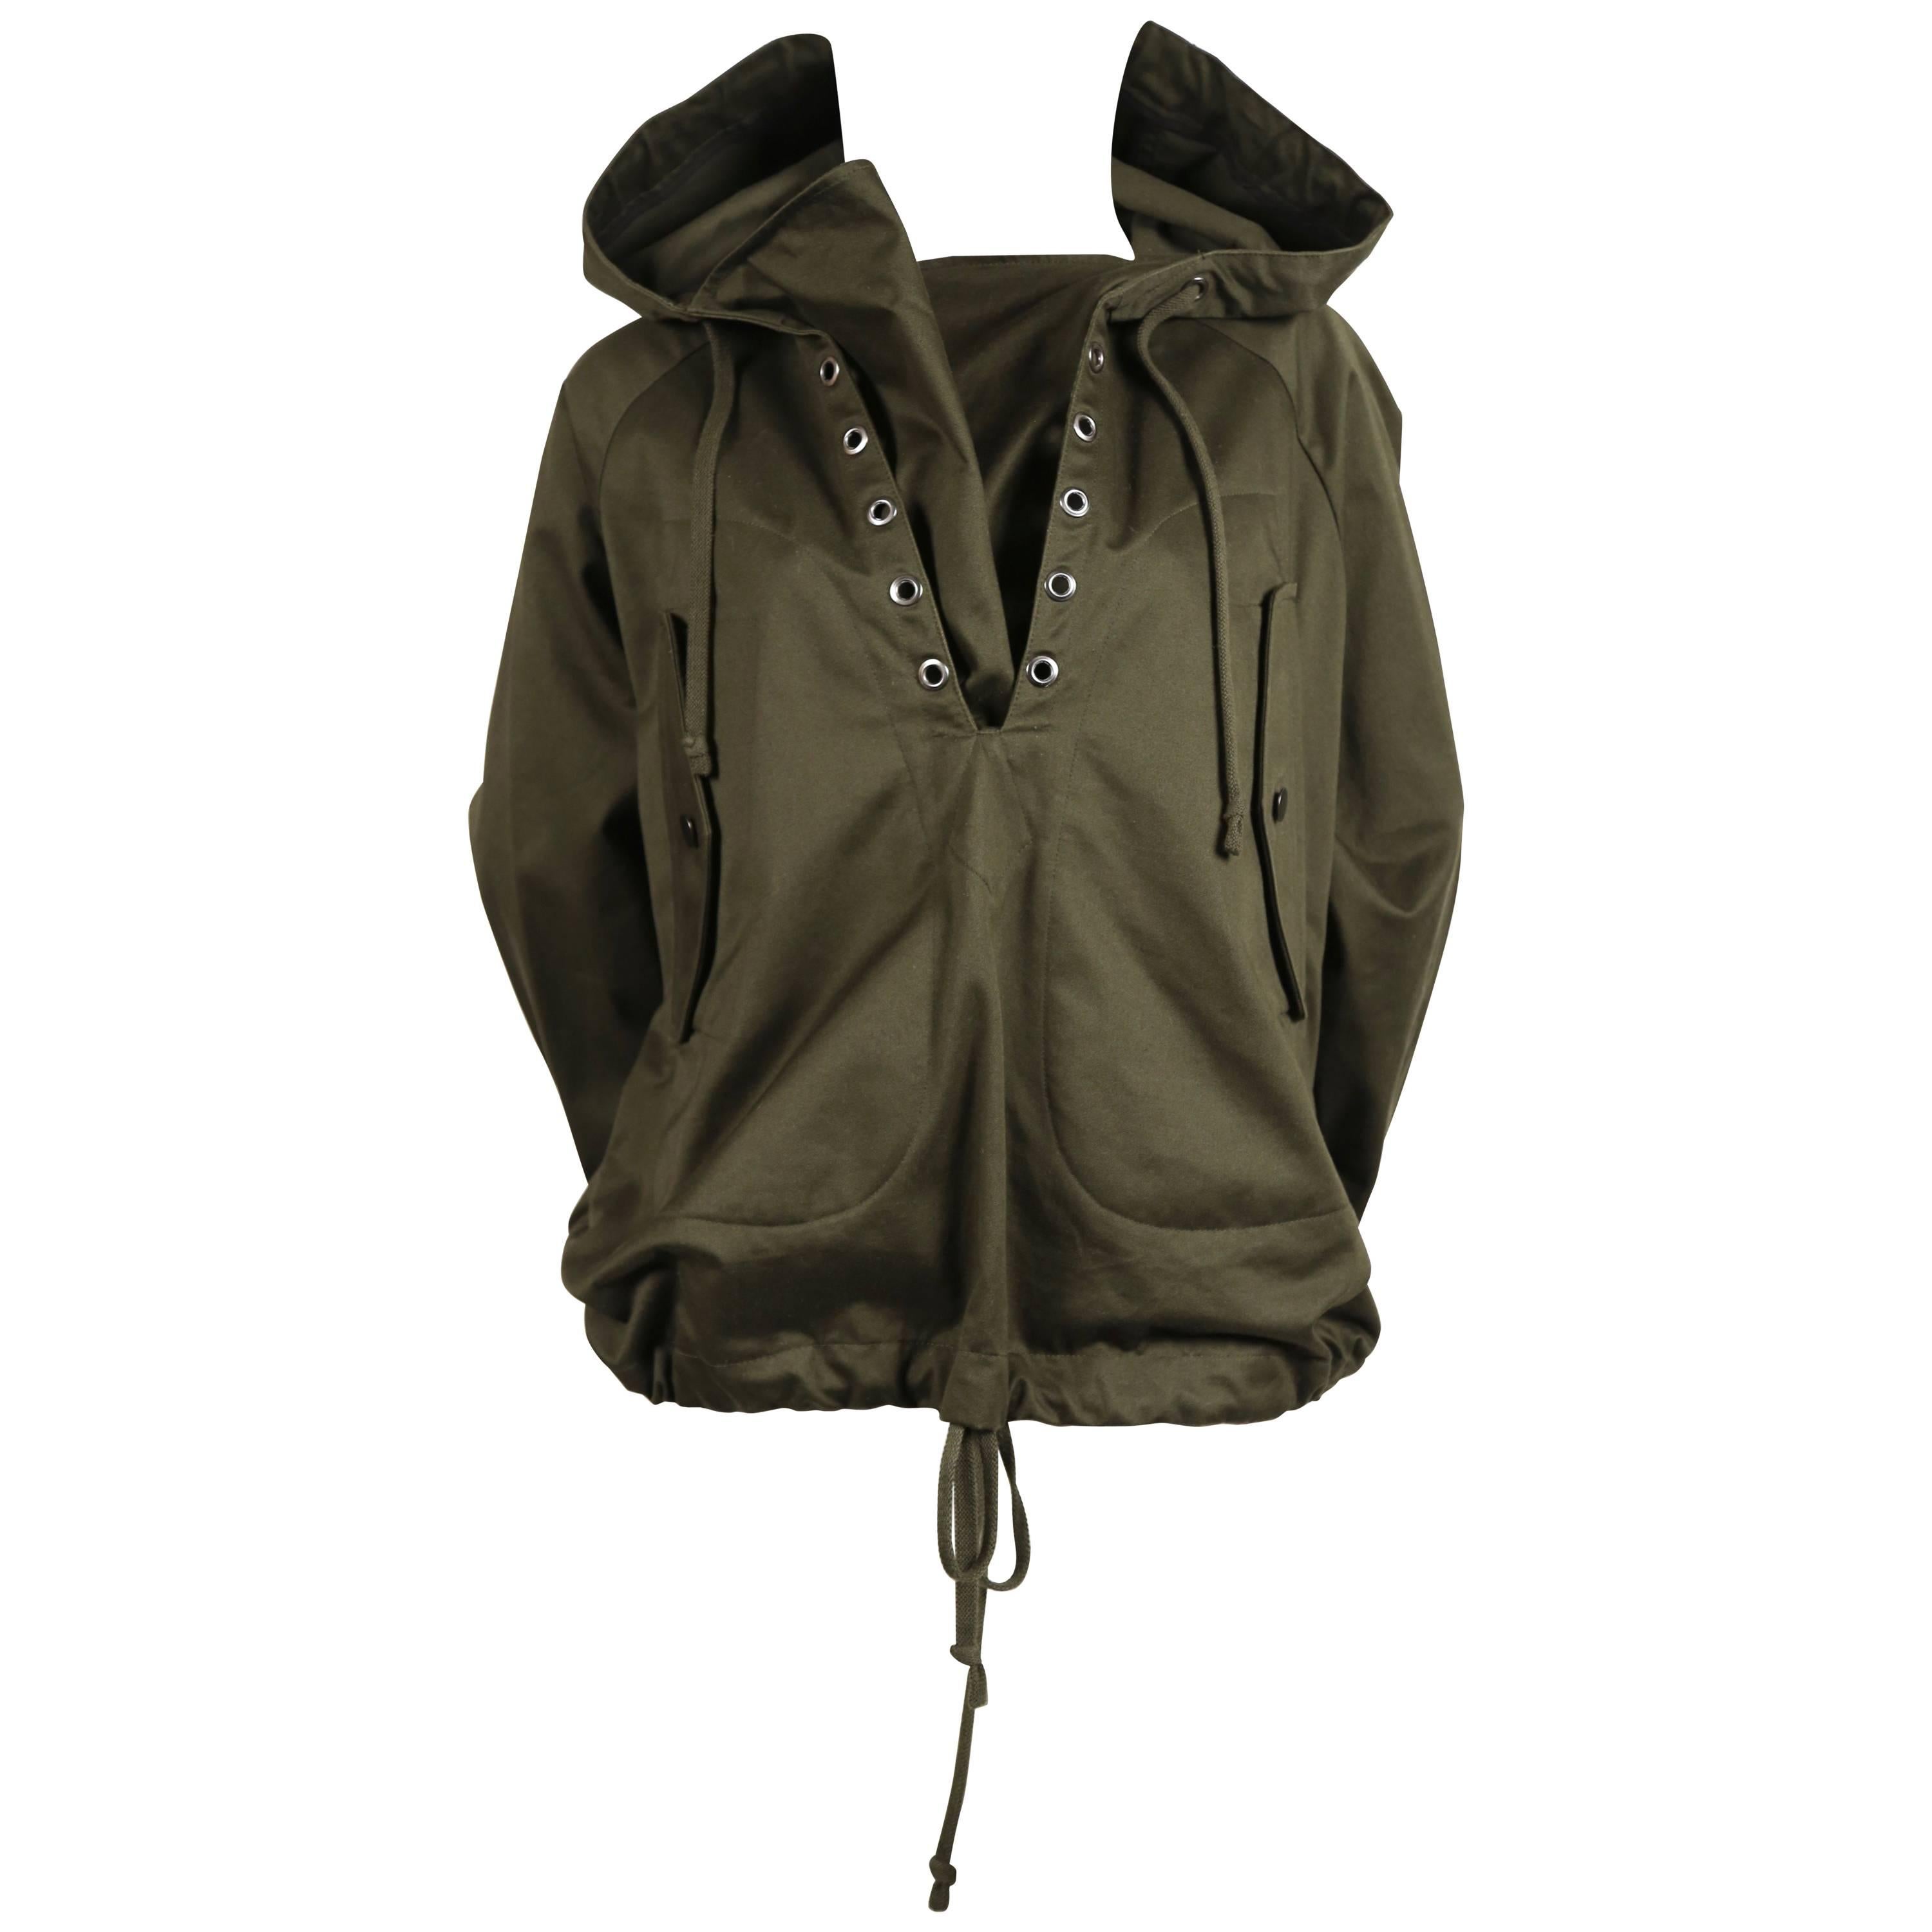 Celine By Phoebe Philo army green anorak jacket in polished cotton For Sale